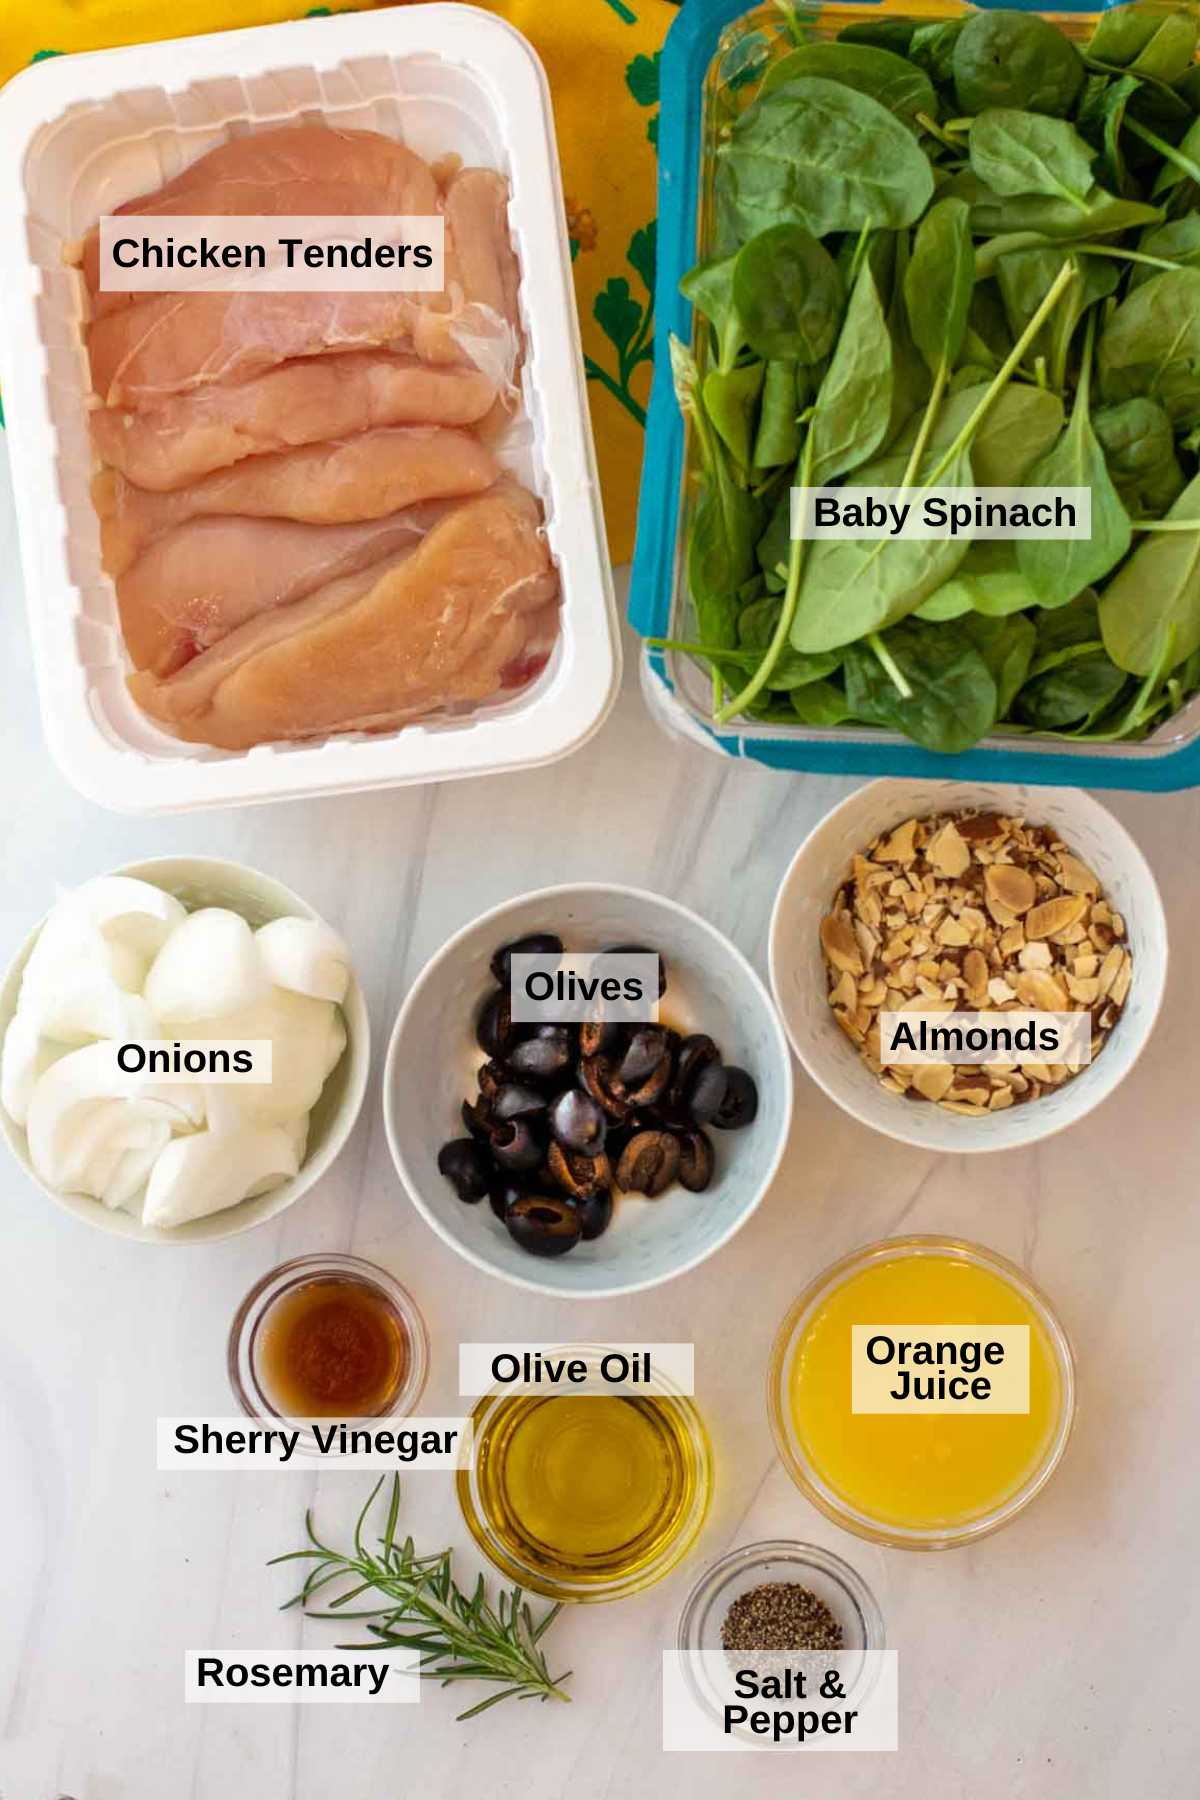 Ingredients to make wilted spinach salad with grilled chicken.